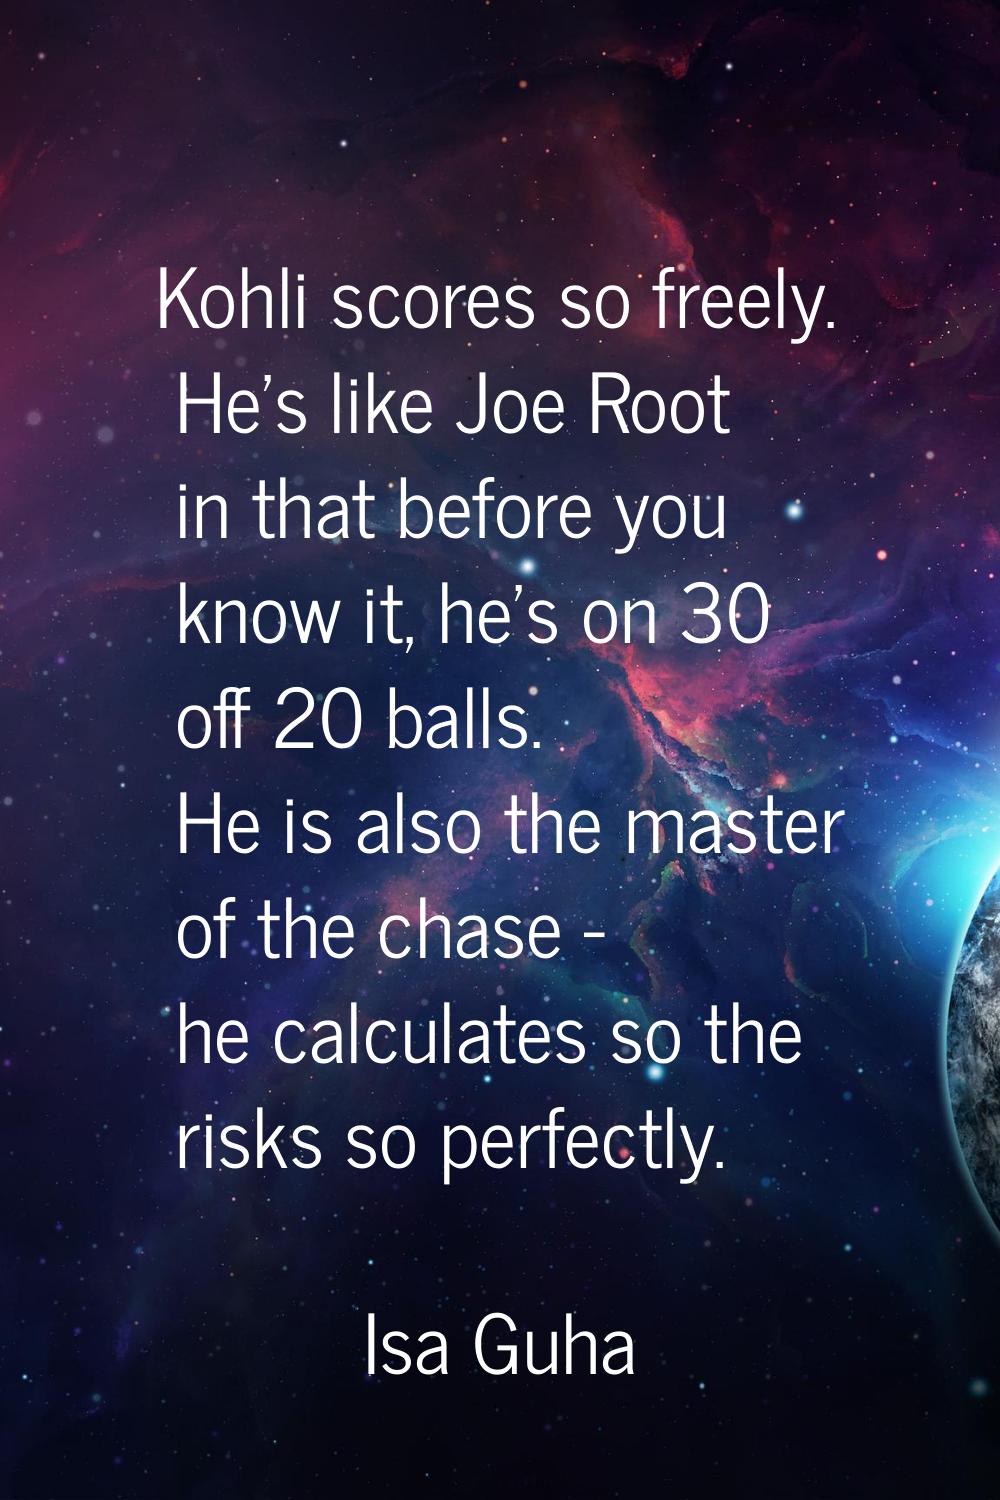 Kohli scores so freely. He's like Joe Root in that before you know it, he's on 30 off 20 balls. He 